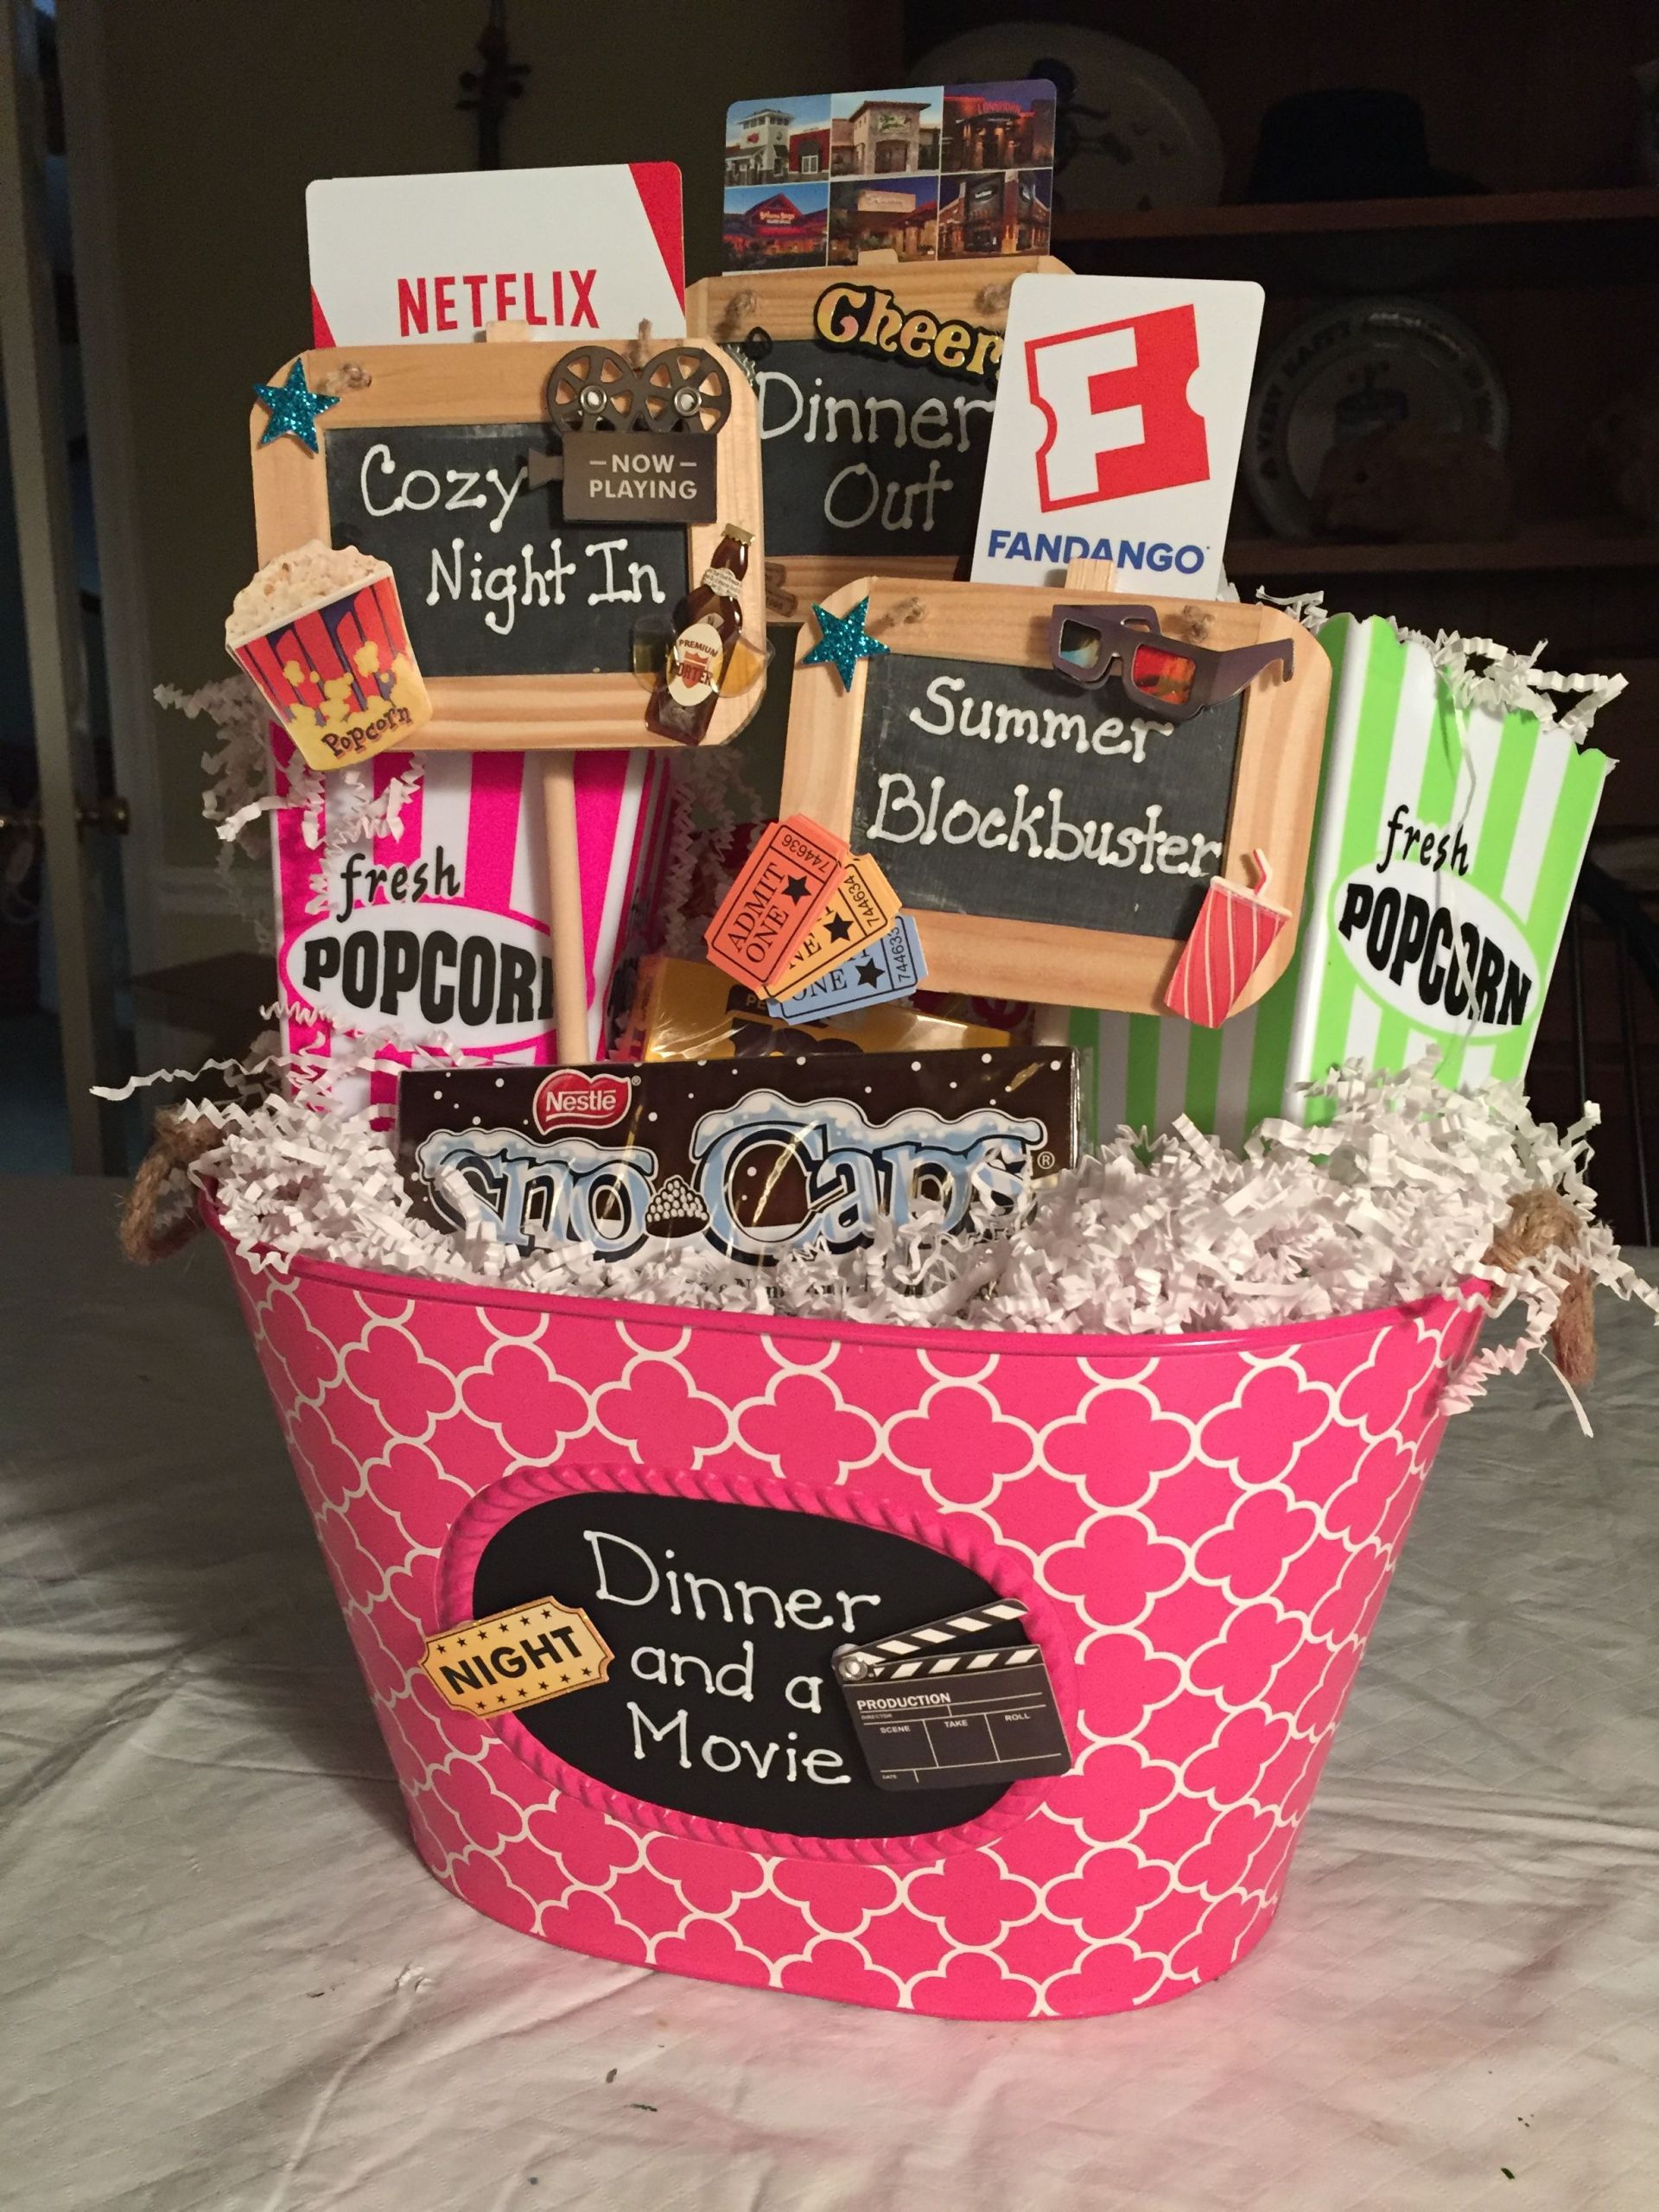 Dinner Gift Basket Ideas
 Dinner and a Movie